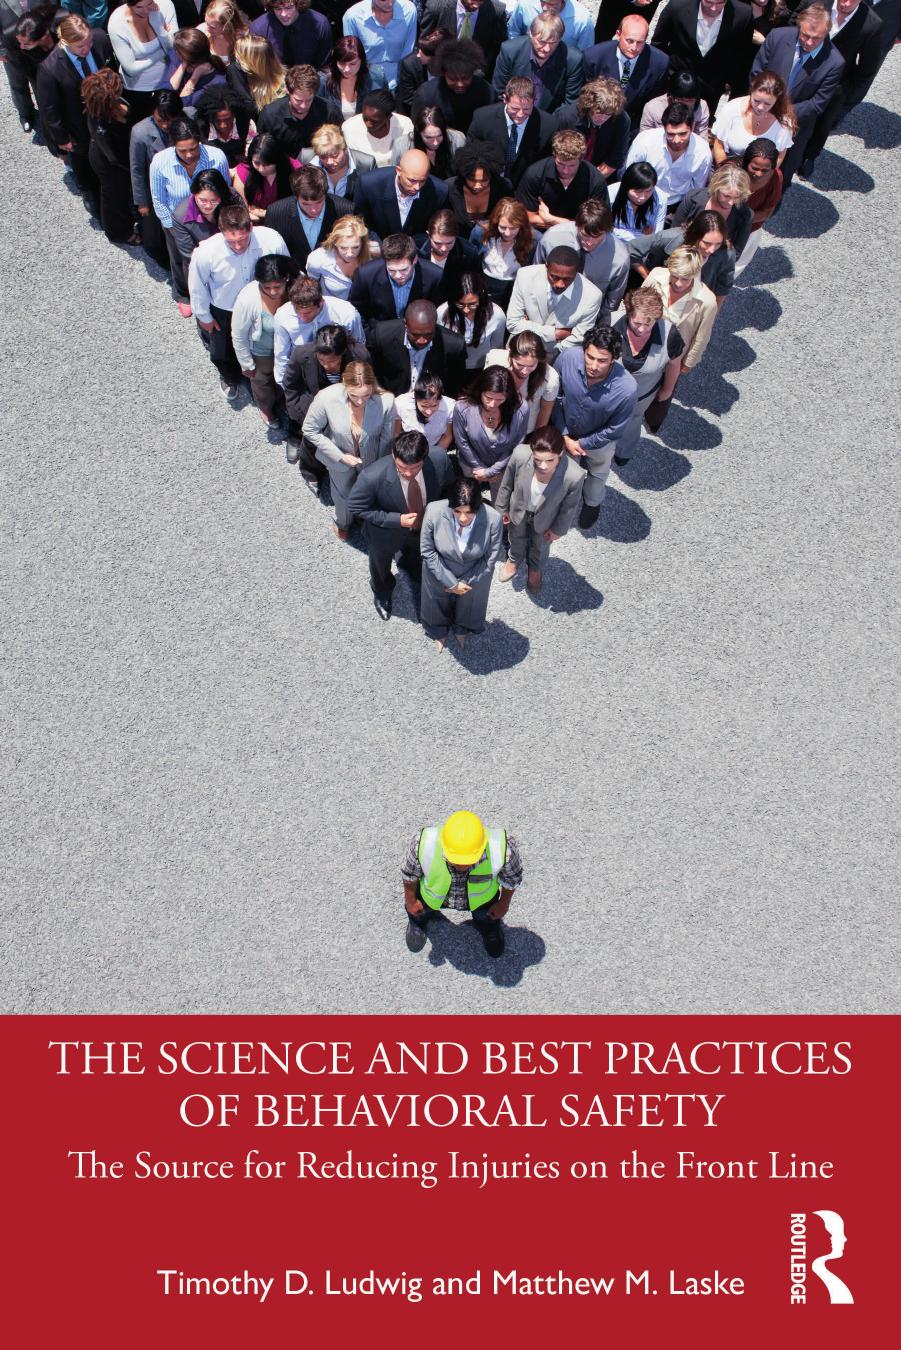 The Science and Best Practices of Behavioral Safety: The Source for Reducing Injuries on the Front Line by Timothy D. Ludwig Matthew M. Laske